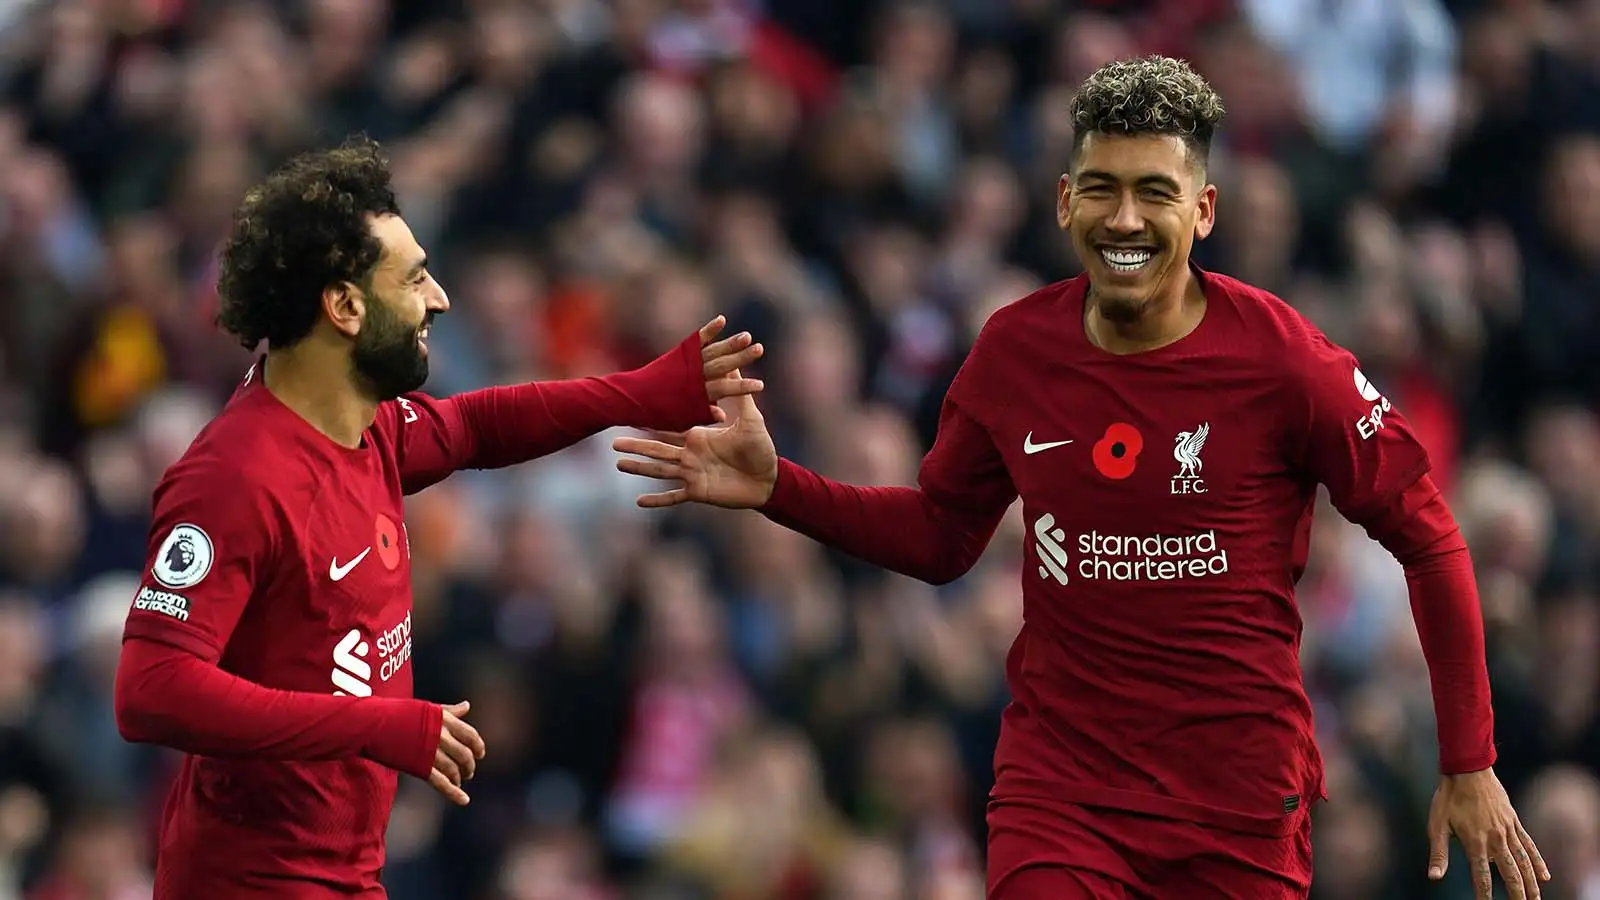 Liverpool's Roberto Firmino (right) celebrates scoring their side's first goal of the game during the Premier League match at Anfield, Liverpool. Picture date: Saturday November 12, 2022.